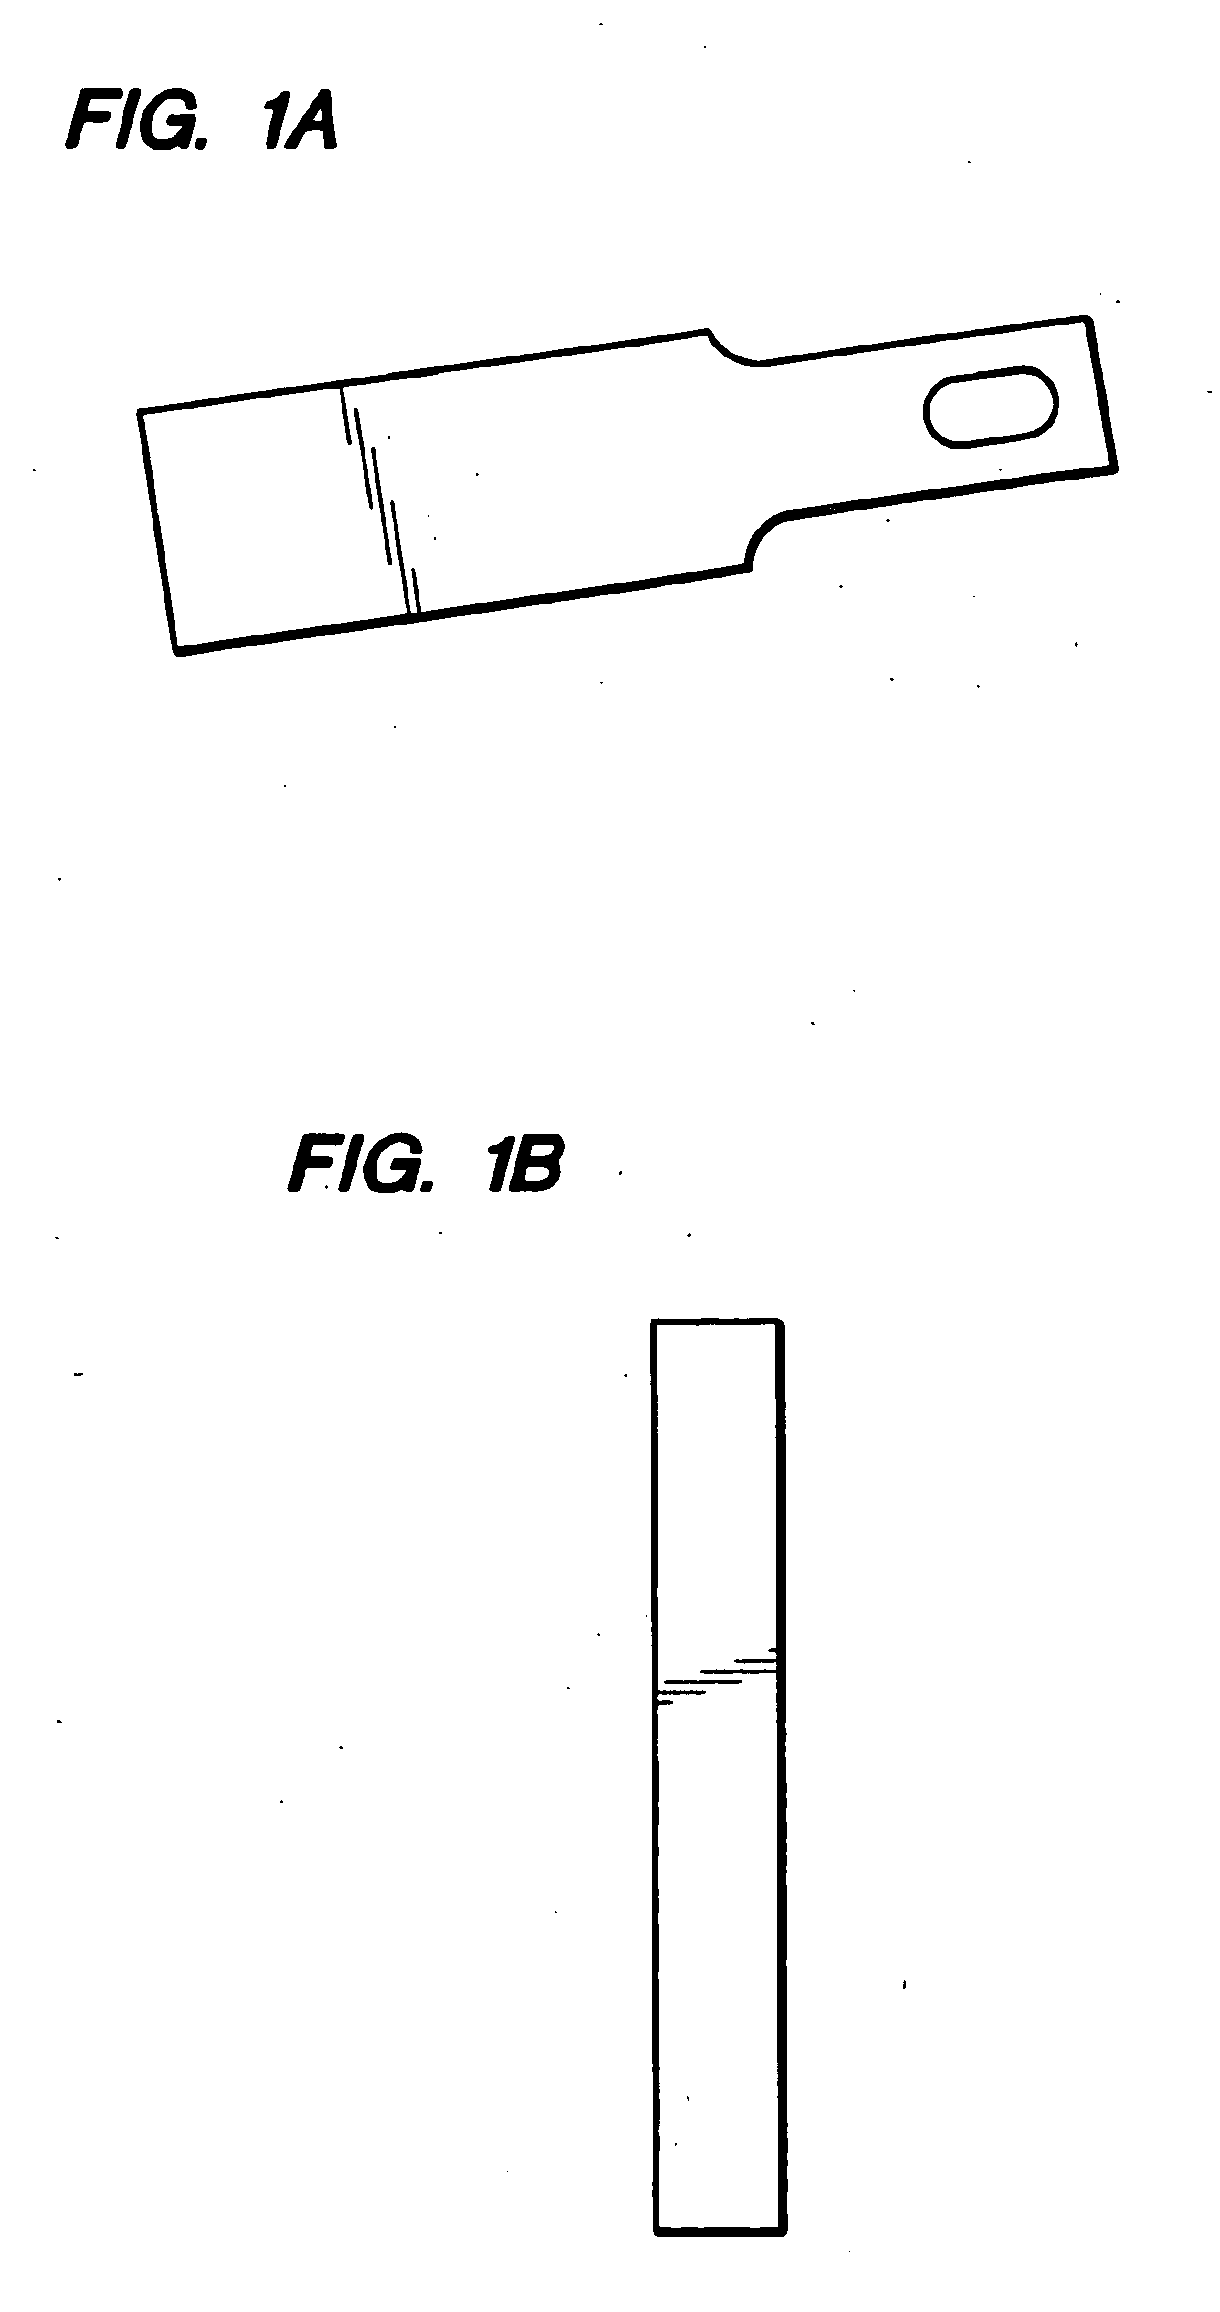 Apparatus and Method for Predicting Meat Tenderness